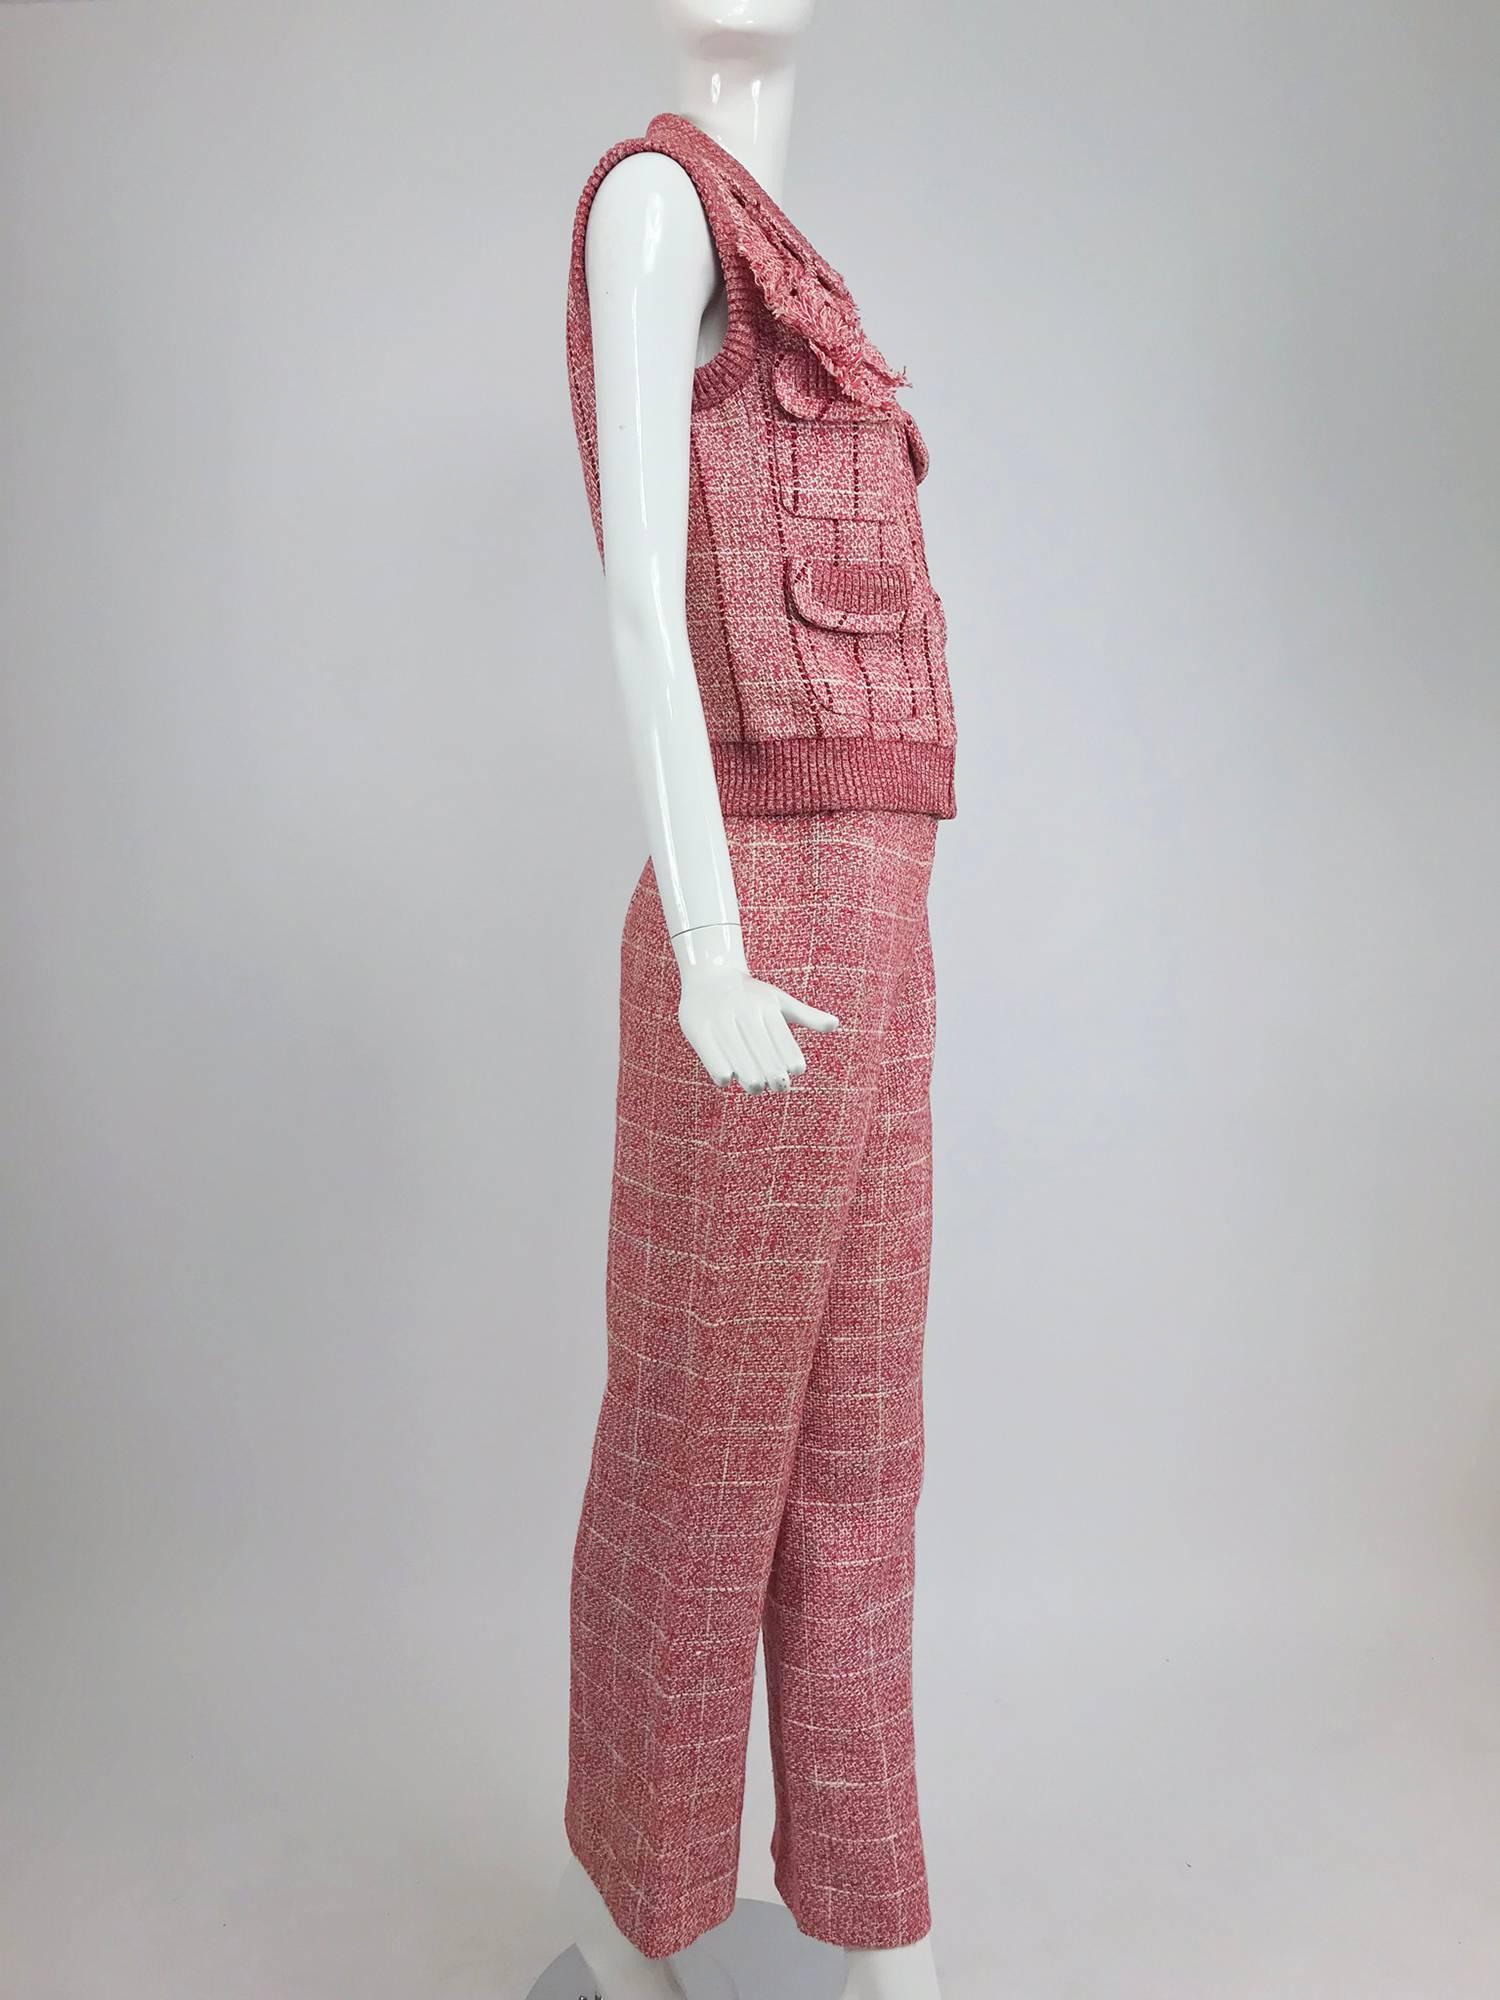 Chanel red and white plaid sequin trim vest and trouser set 2001P...Sleeveless vest has round collar, ribbed knit armscye and hem, four open flap pockets with rib knit detail...Original matching flower pin...Front zipper closure...The vest is